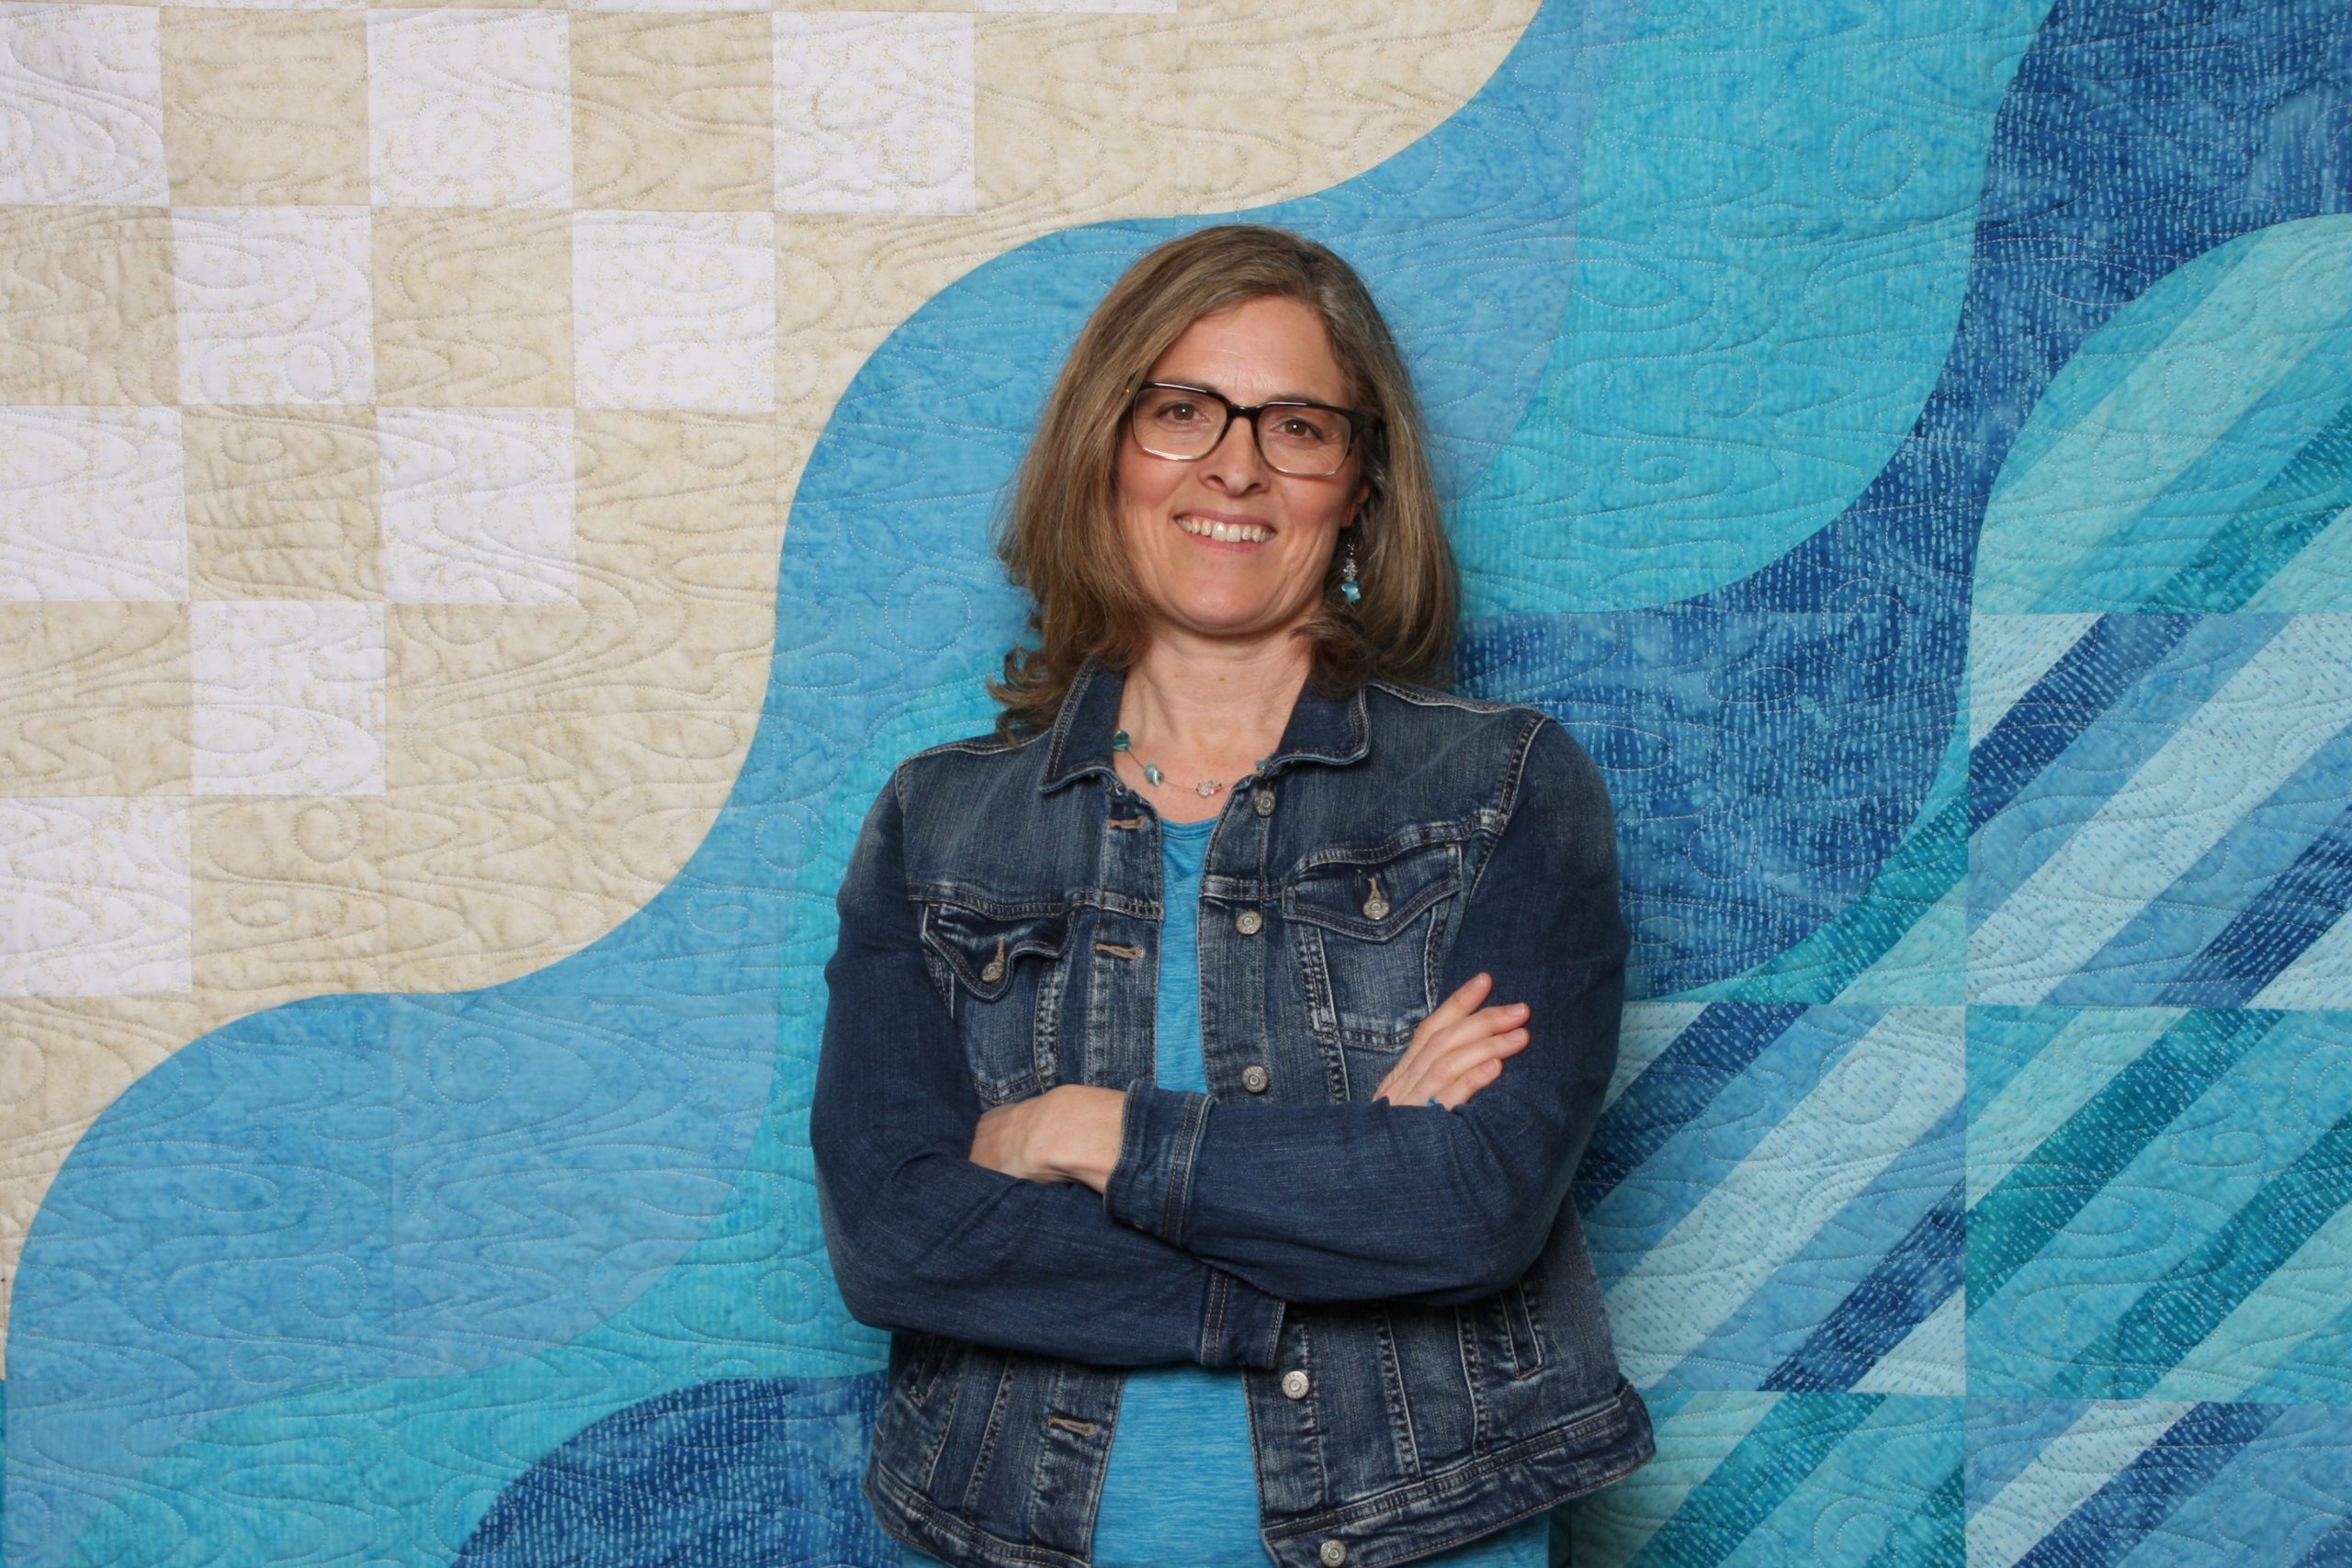 Brandy Maslowski, Special Guest Lecturer and Instructor at Festival of Quilts 2023